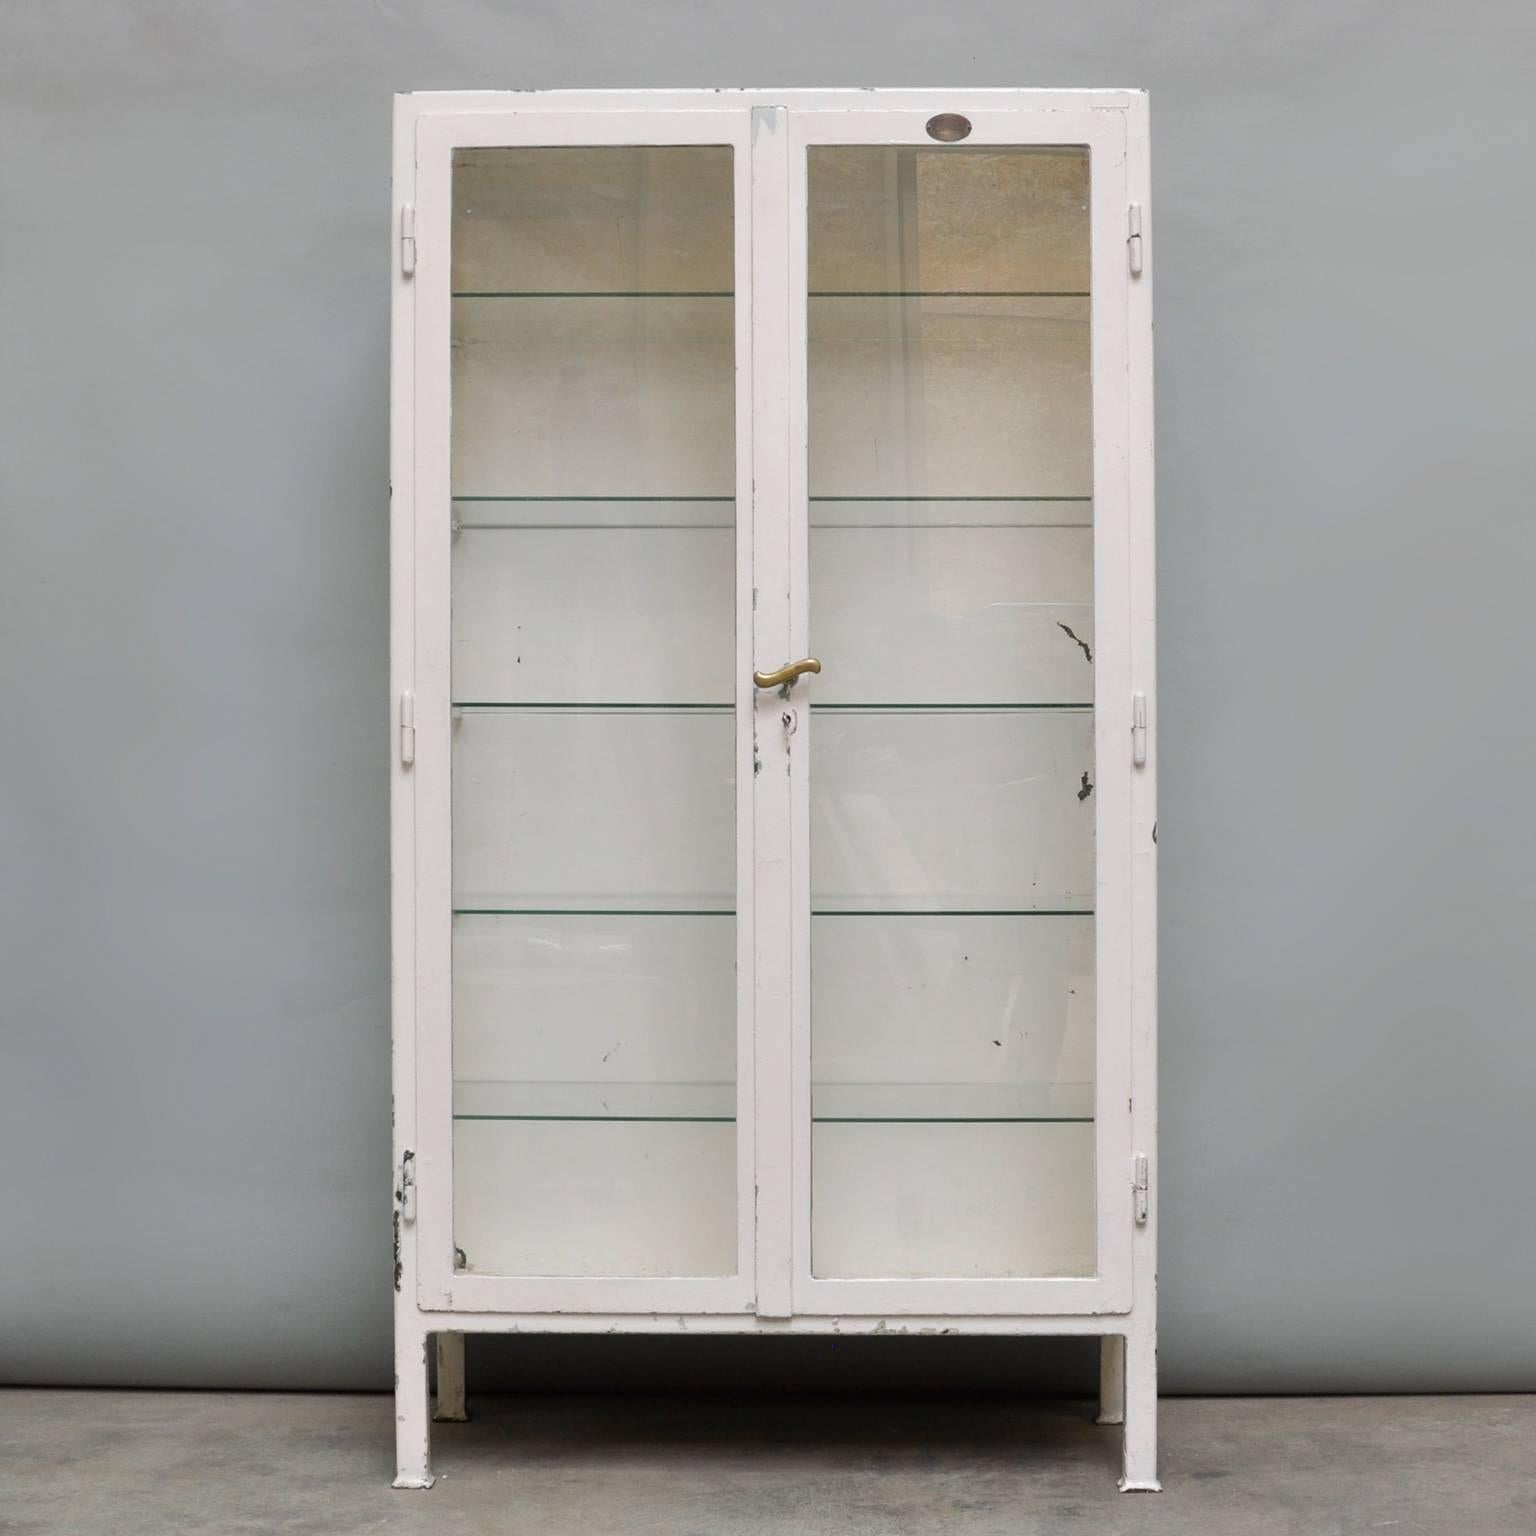 Medical cabinet, produced in de 1930s in Budapest, Hungary. The cabinet is made of thick iron and antique glass. On the label on the front of the cabinet the text: 'MONE, medical instrument and plant equipment, Budapest'. The five glass shelves are